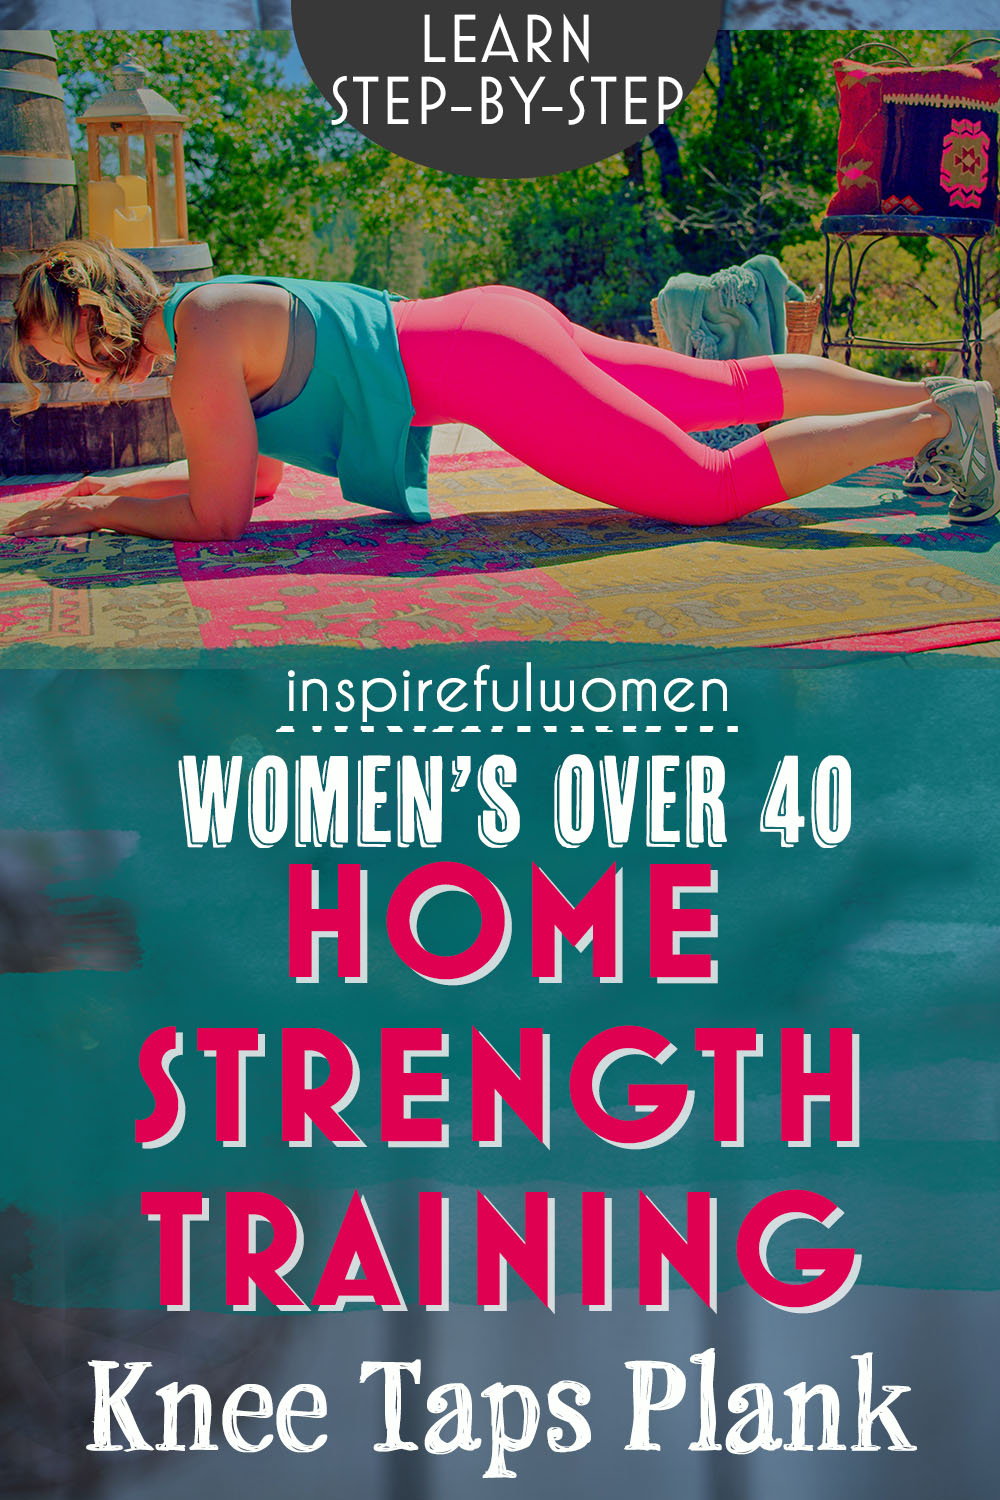 knee-taps-forearm-plank-modified-beginner-bodyweight-abs-core-stability-exercise-at-home-women-over-40